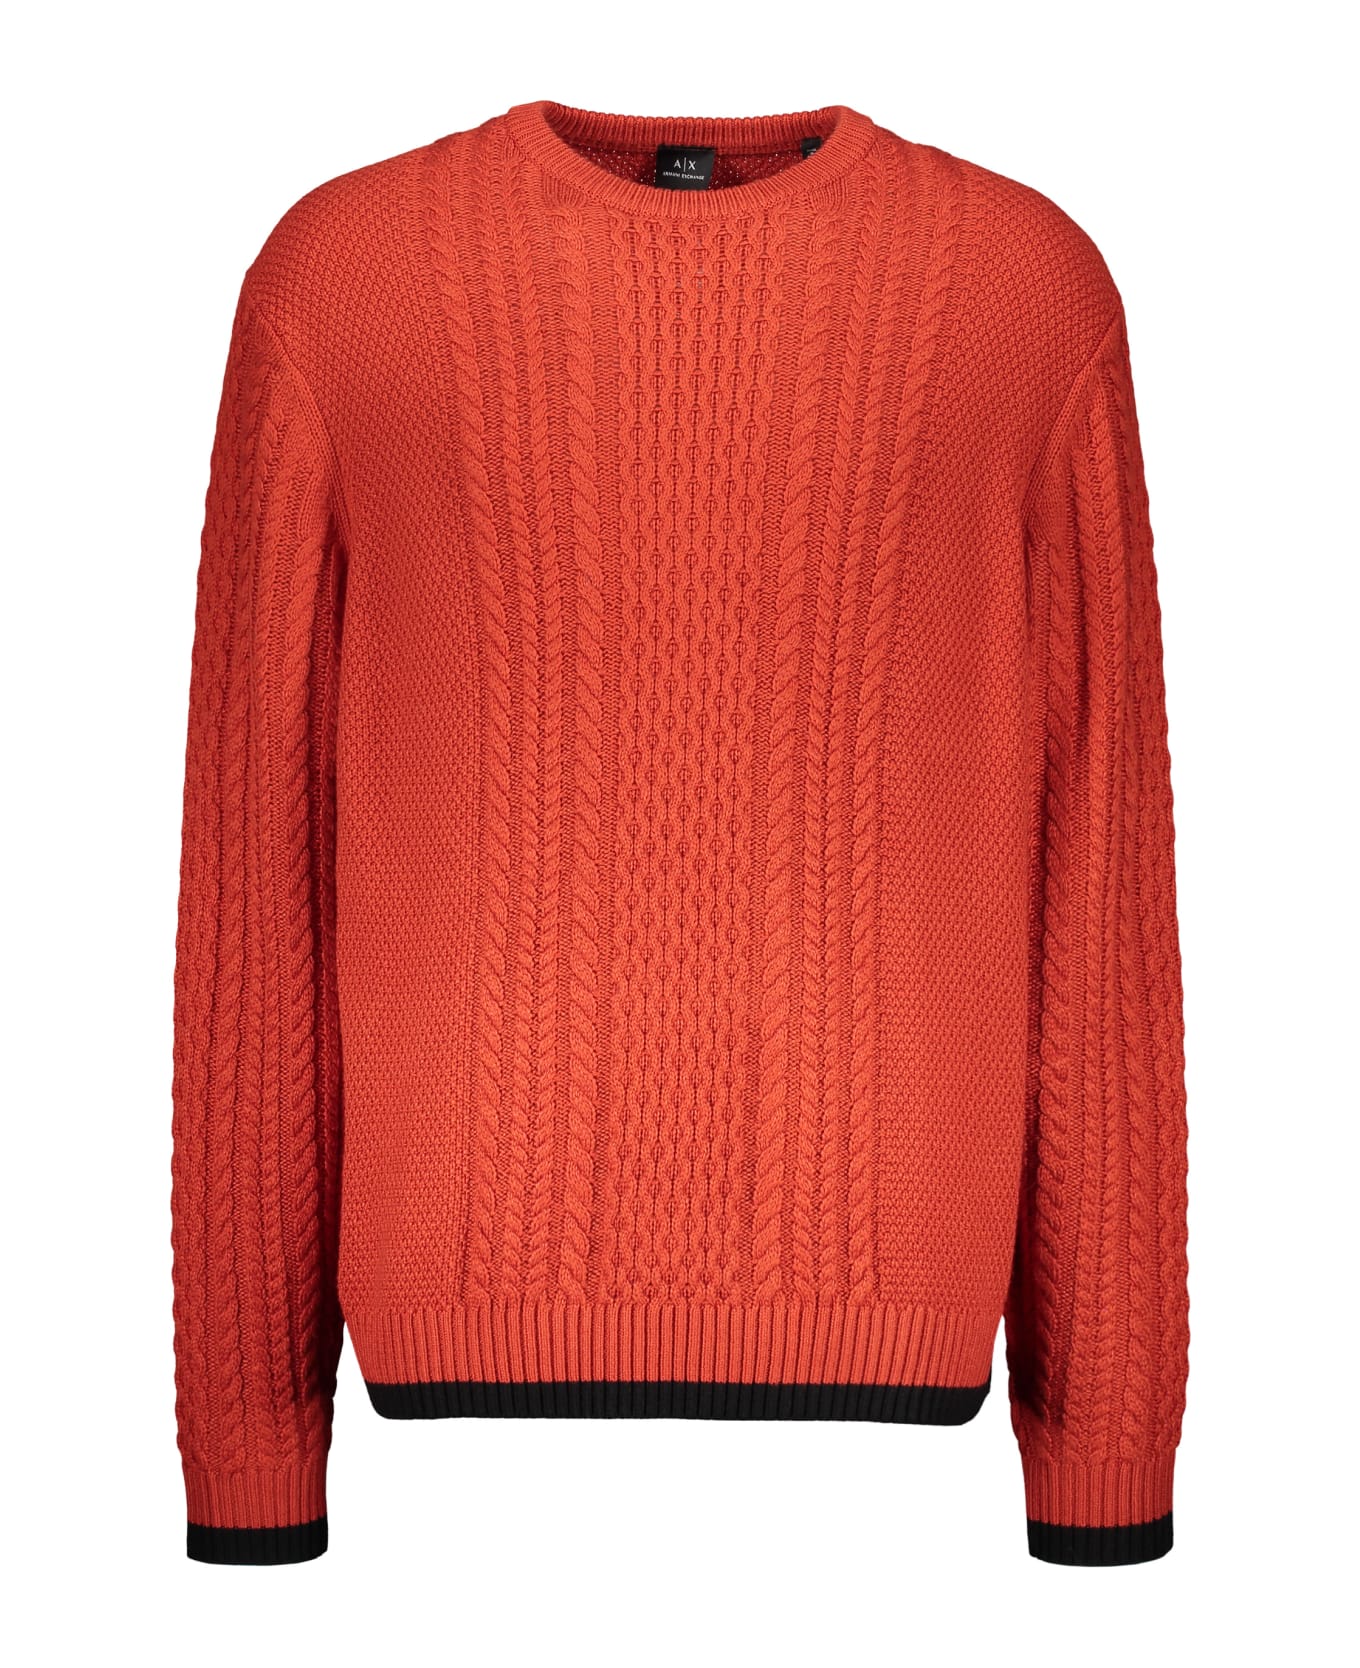 Armani Exchange Cable Knit Sweater - Copper